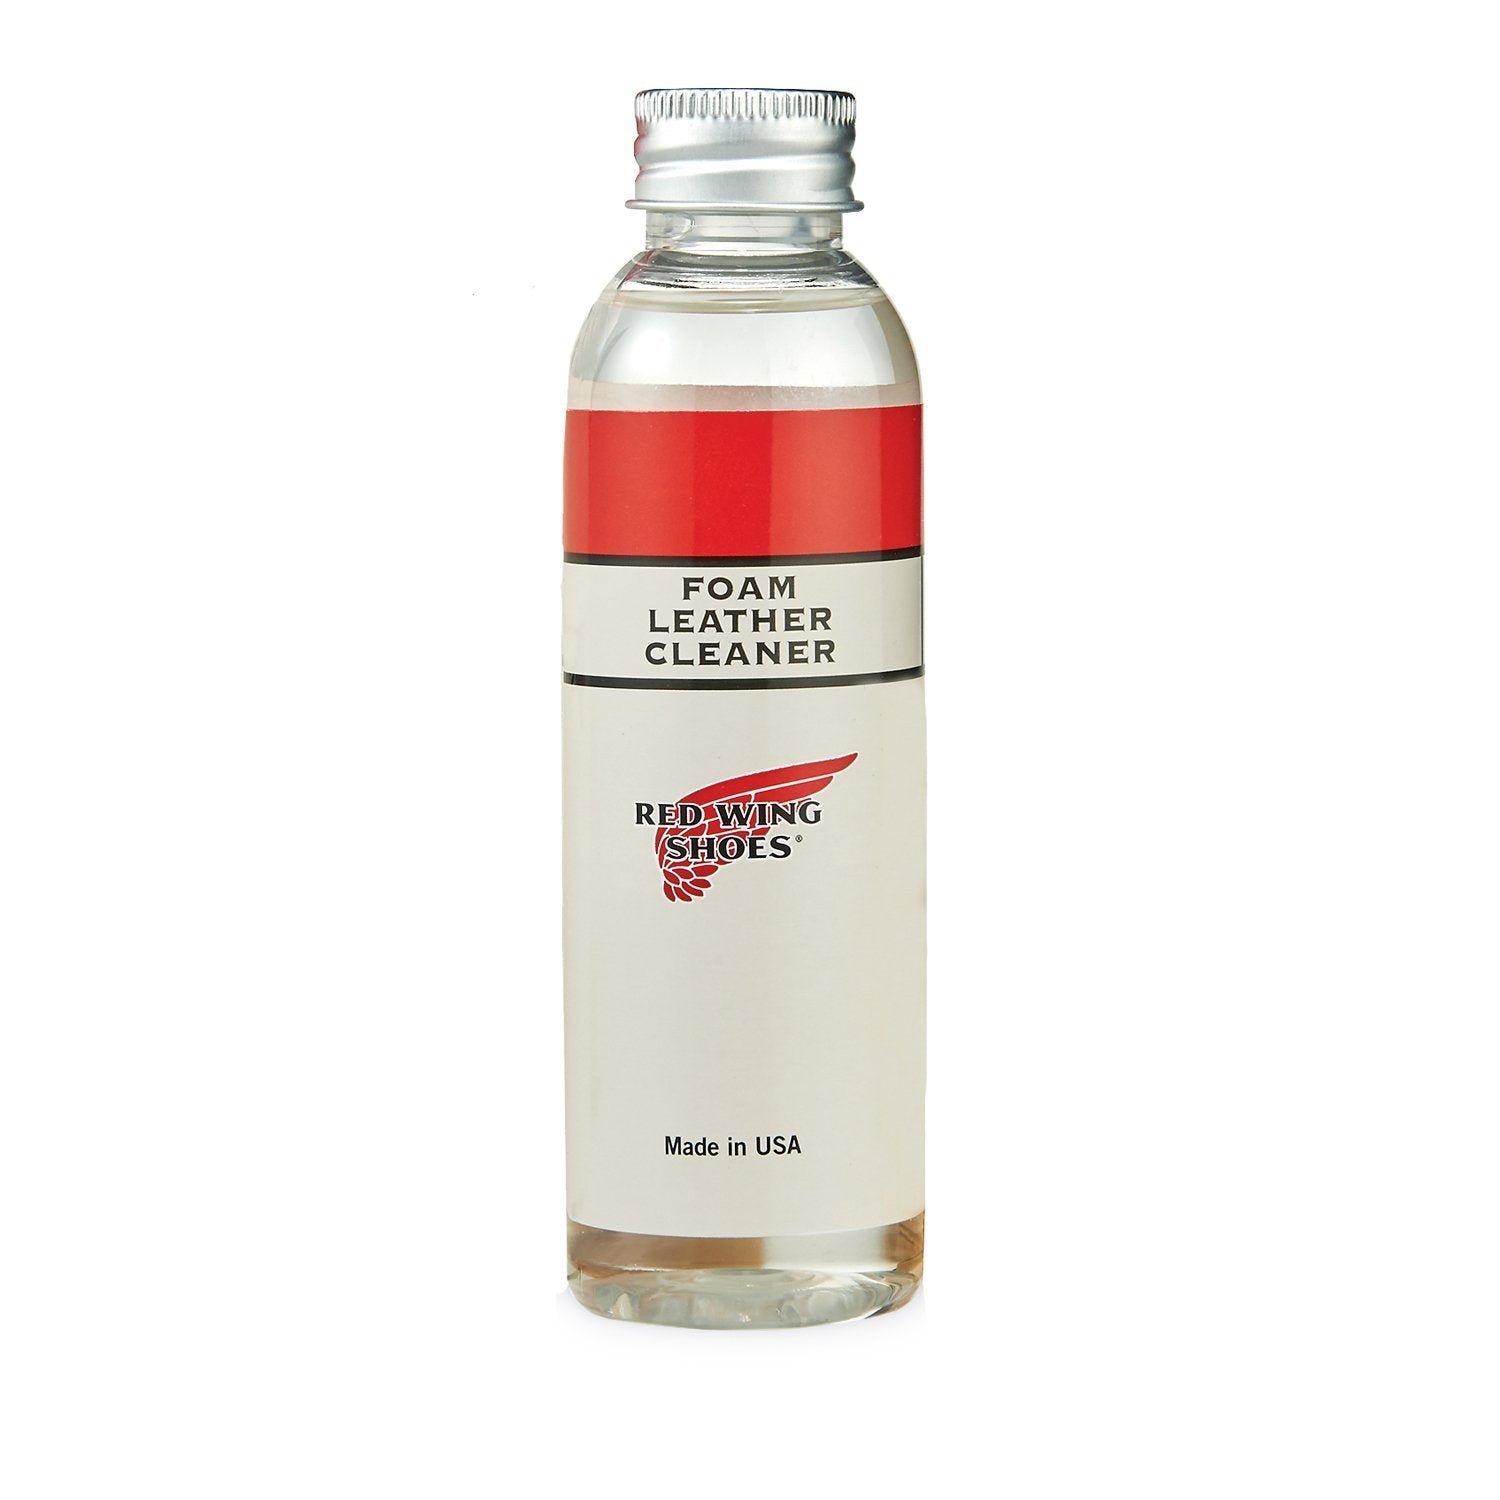 Foam Leather Cleaner - grown&sewn